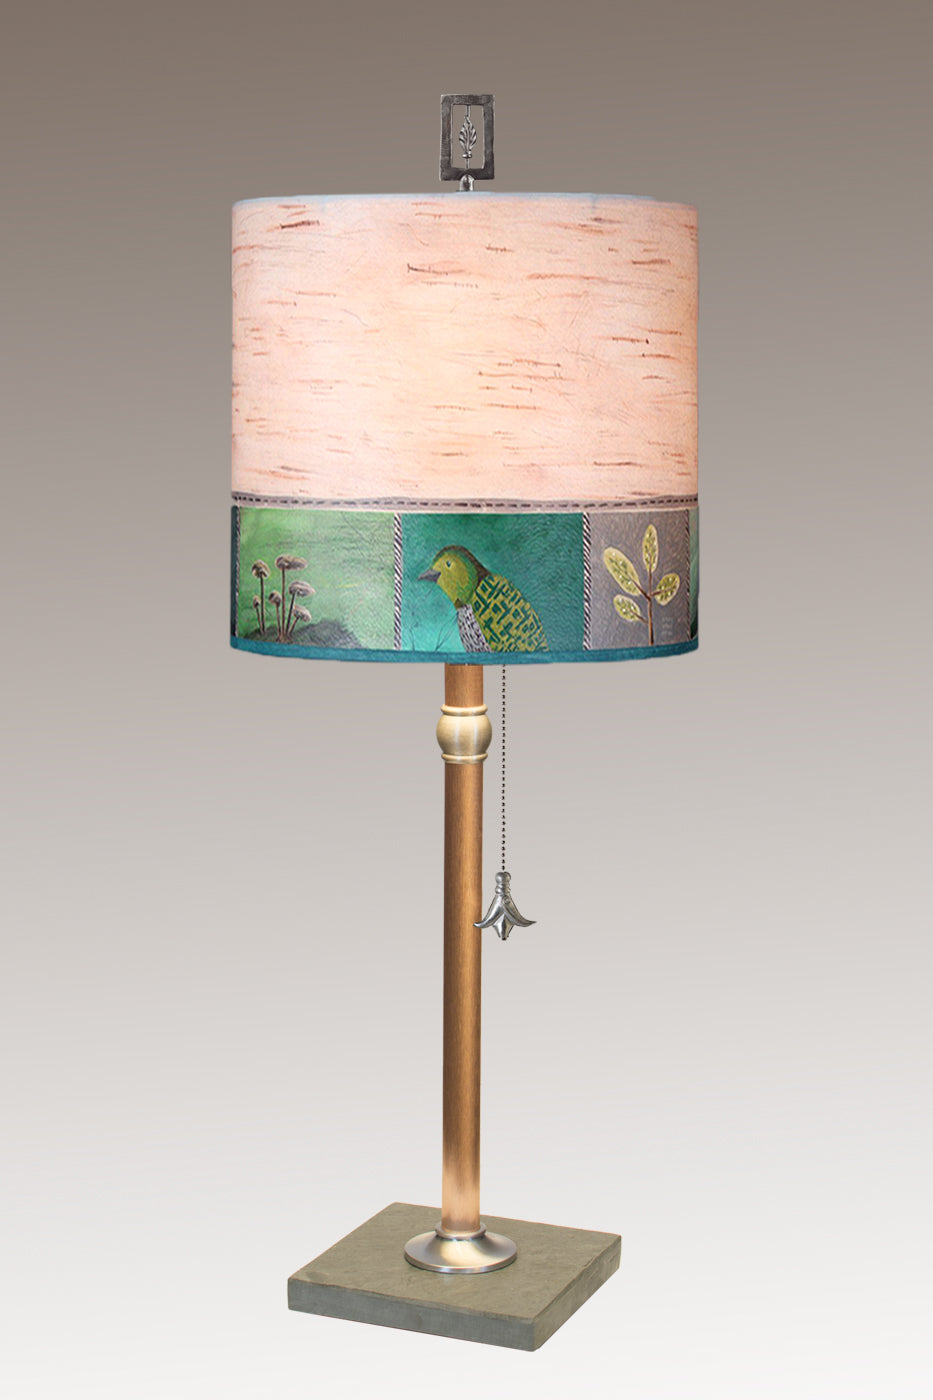 Janna Ugone & Co Table Lamps Copper Table Lamp with Medium Drum Shade in Woodland Trails in Birch